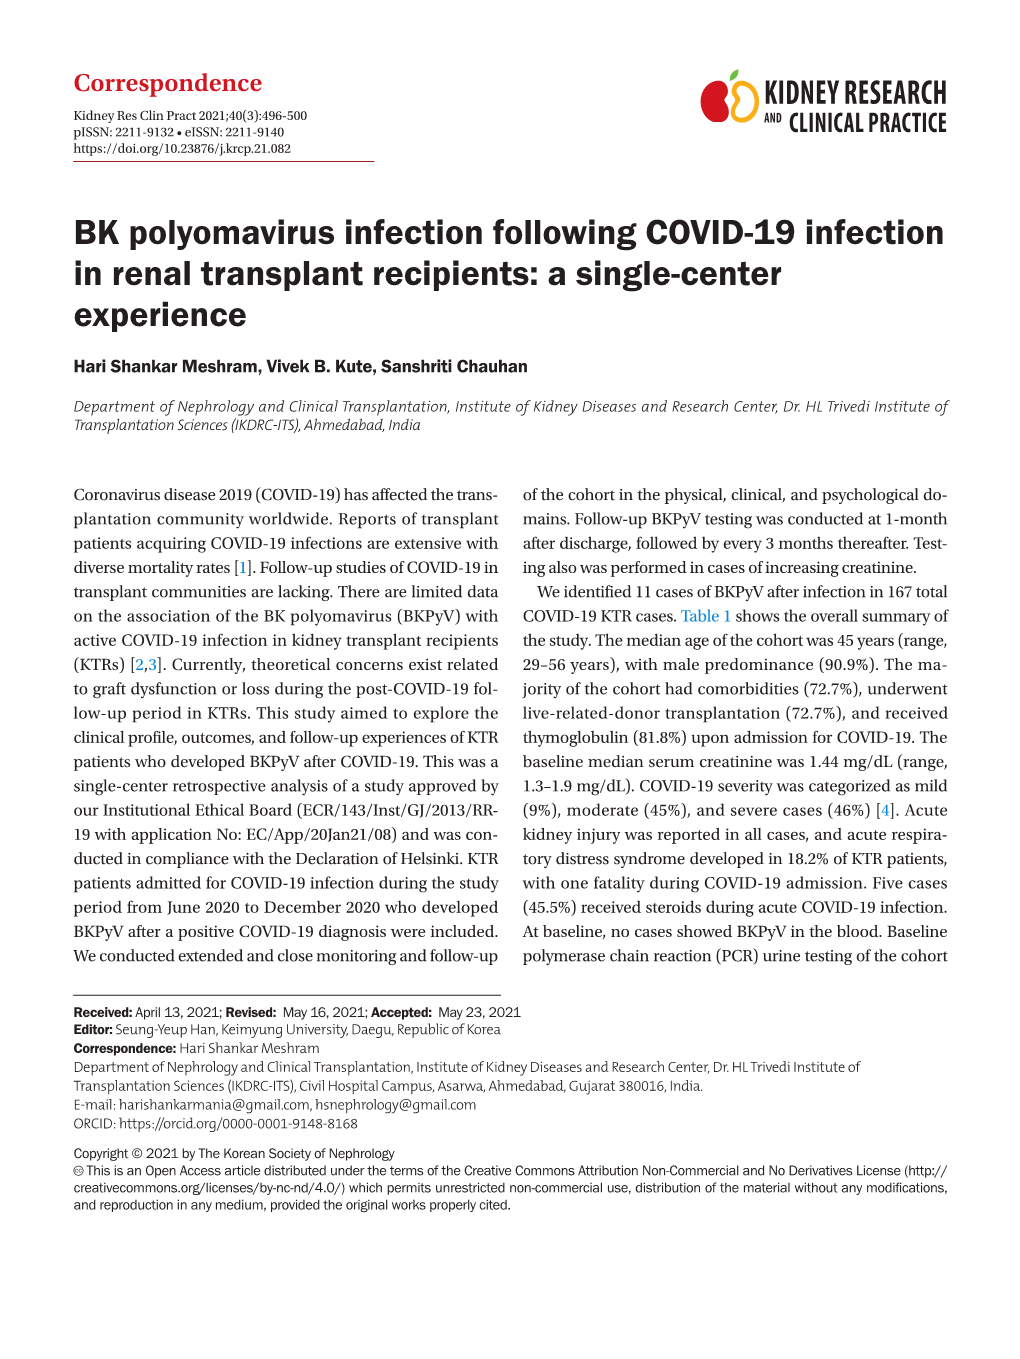 BK Polyomavirus Infection Following COVID-19 Infection in Renal Transplant Recipients: a Single-Center Experience